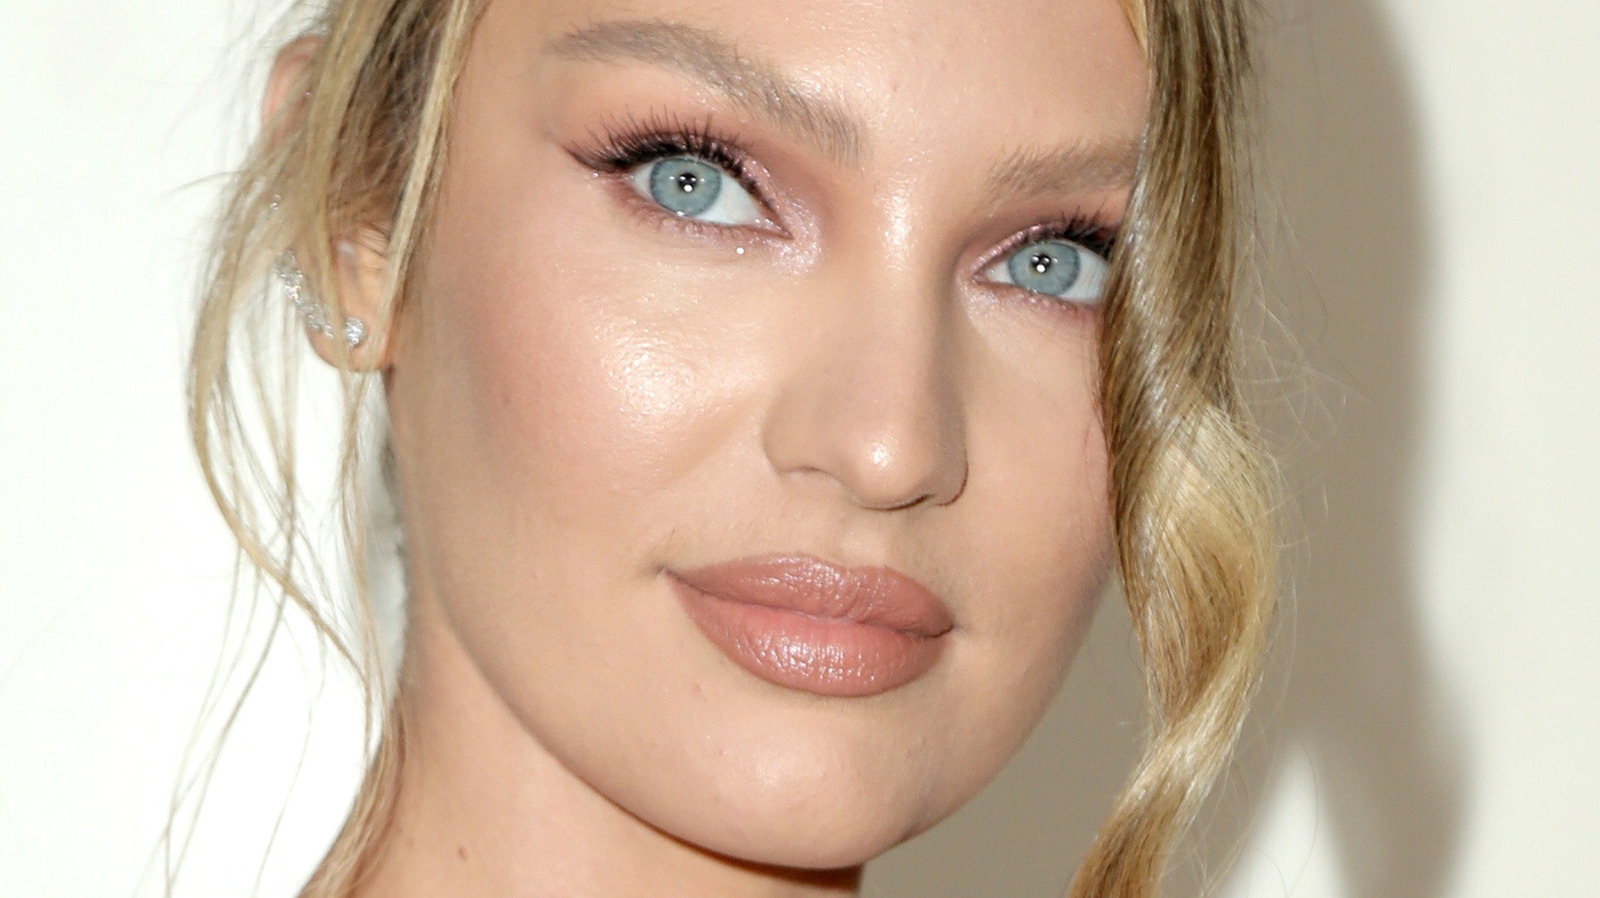 Candice Swanepoel: Models need to be smart and stunning